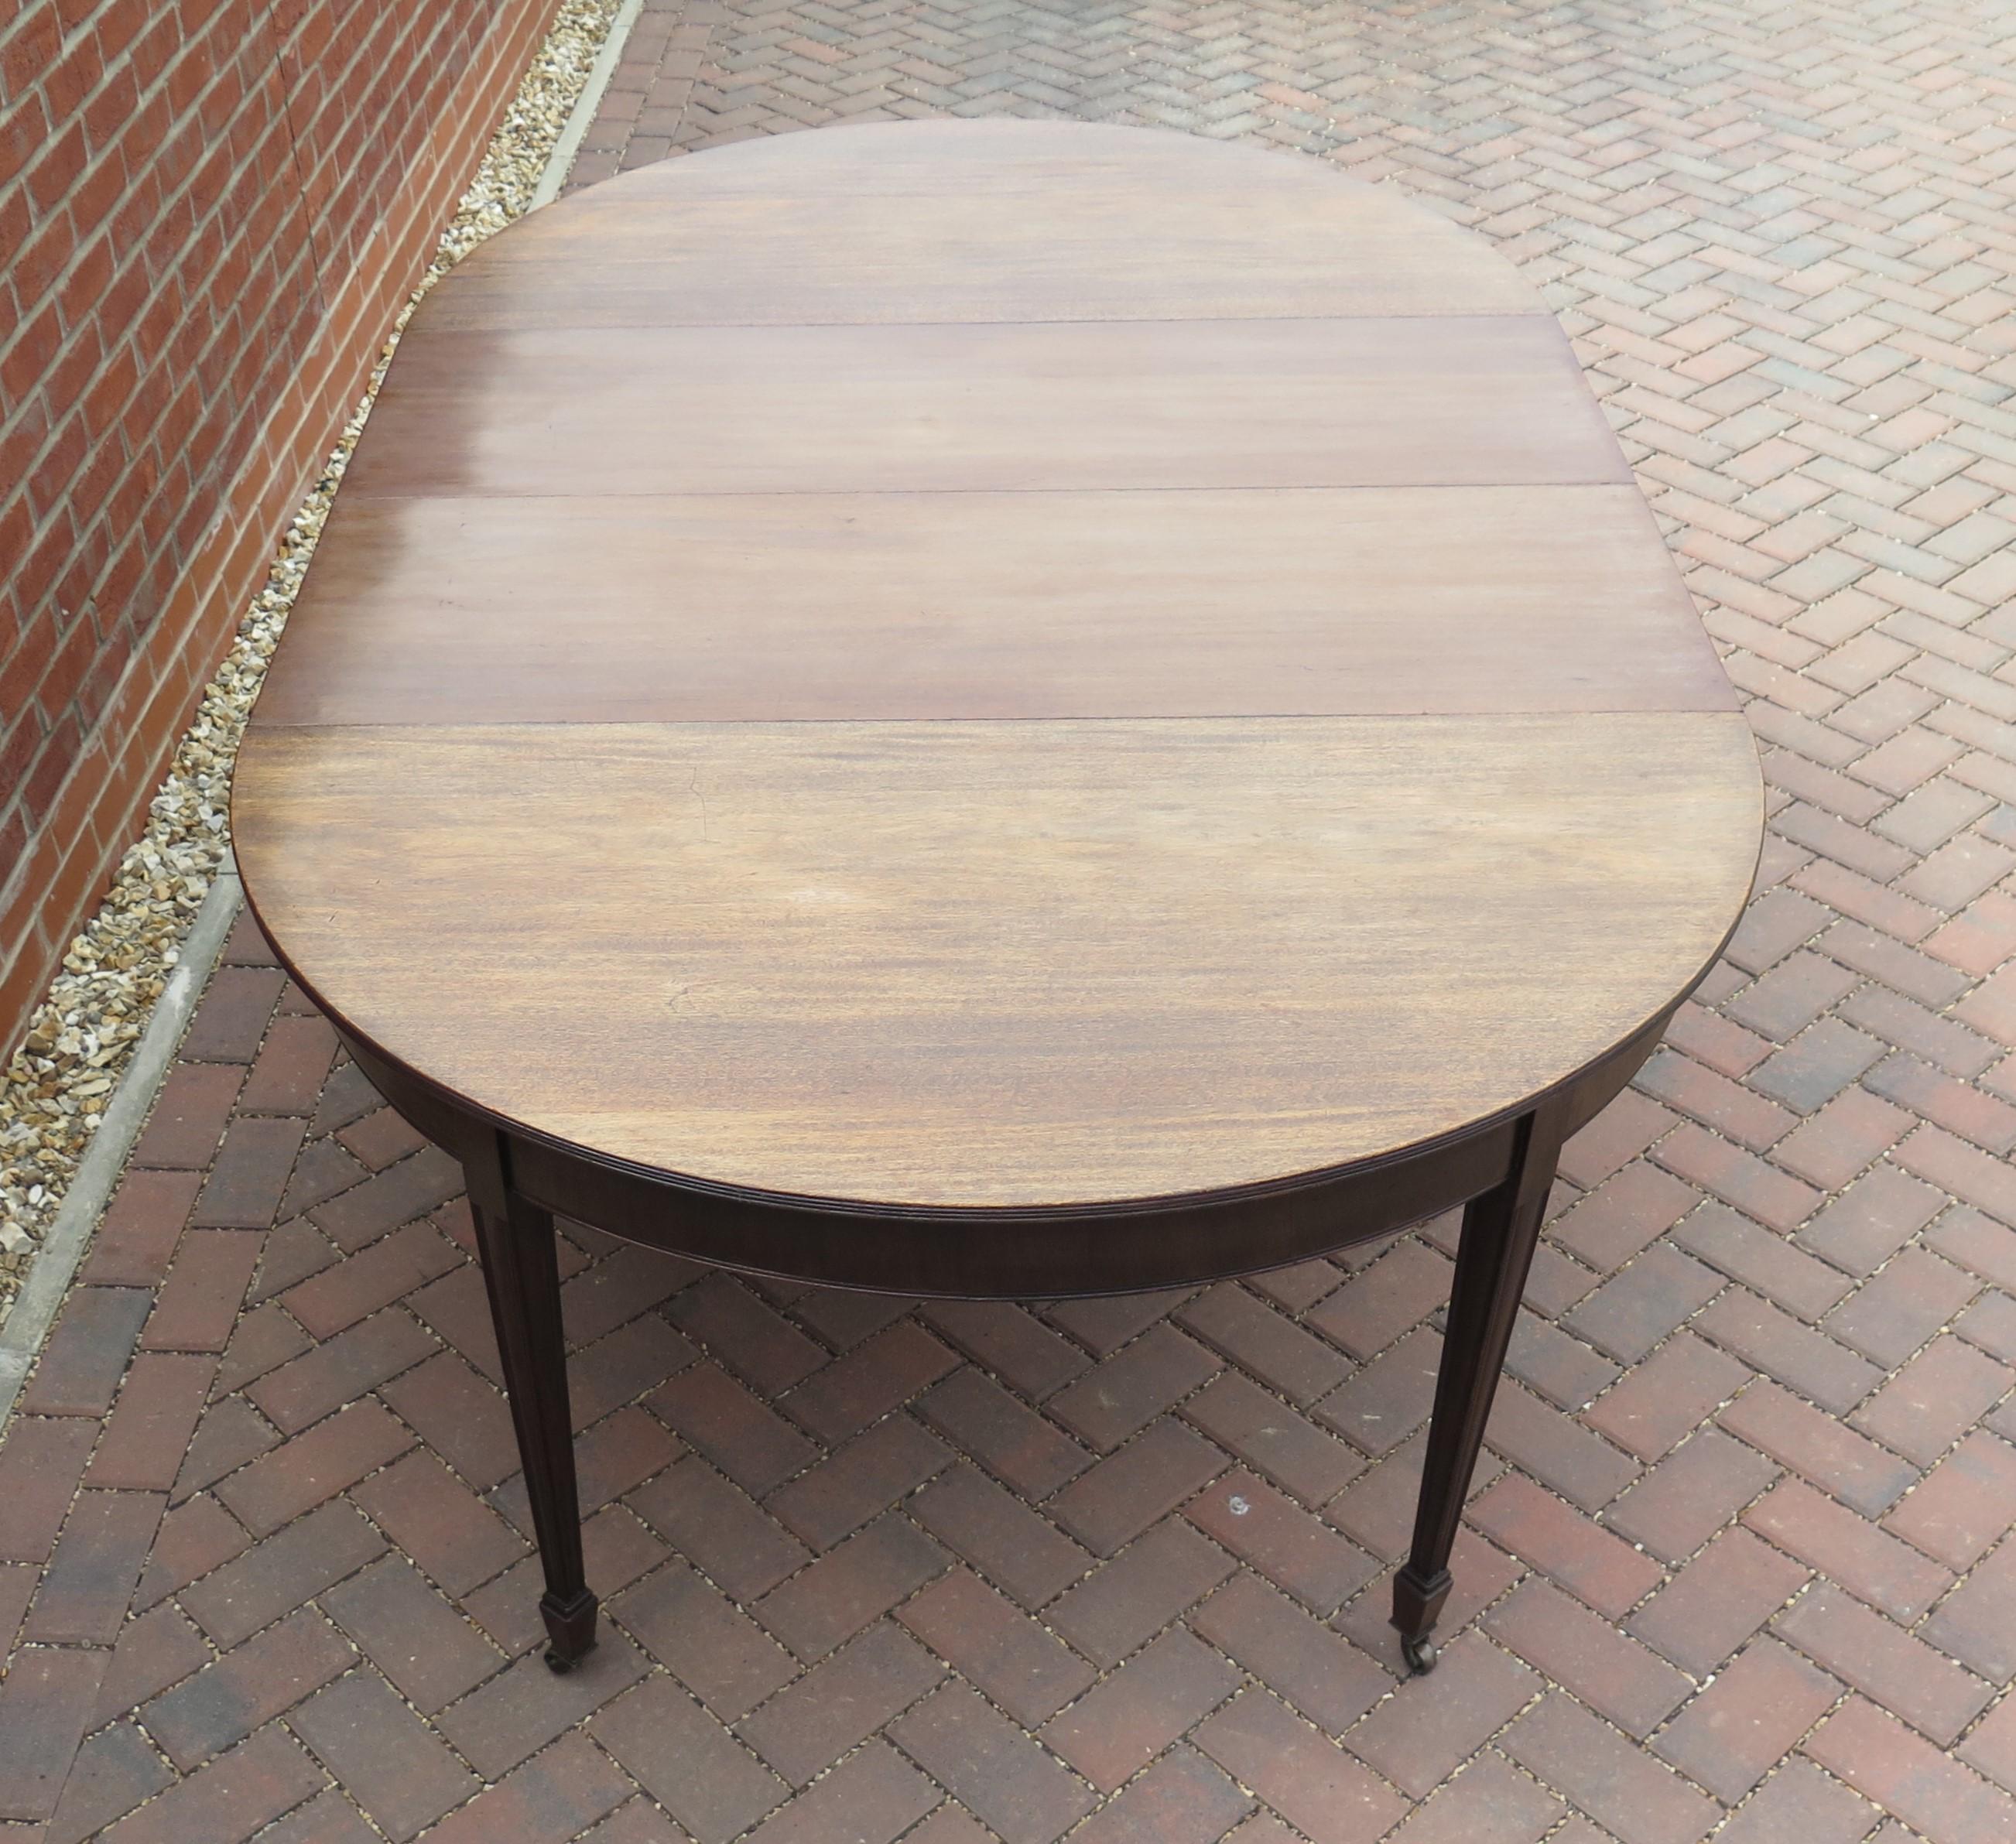 This is a high quality English extending dining table made from hardwood, in the period of George III, during the late 18th century, circa 1785.

This table will seat 10 people on account of its large width of over 54 inches plus the semi circular